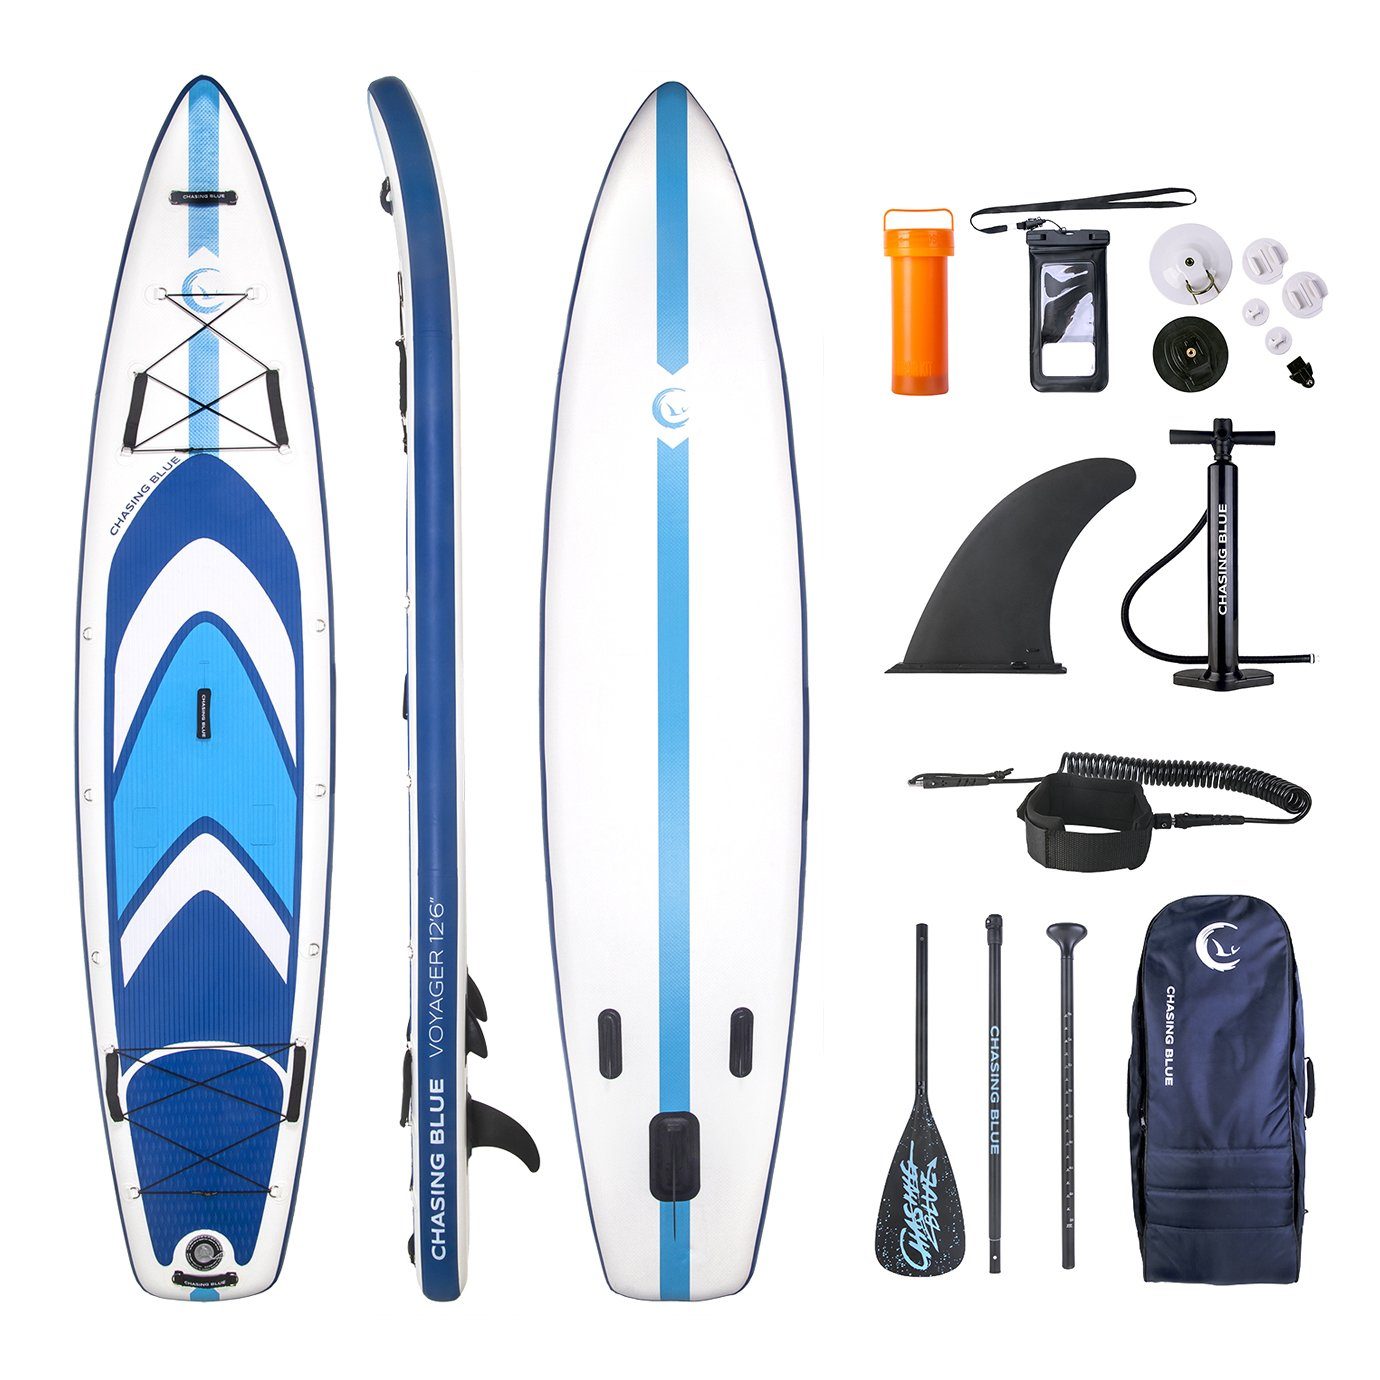 ORION - VOYAGER iSUP BOARD OutdoorMaster 